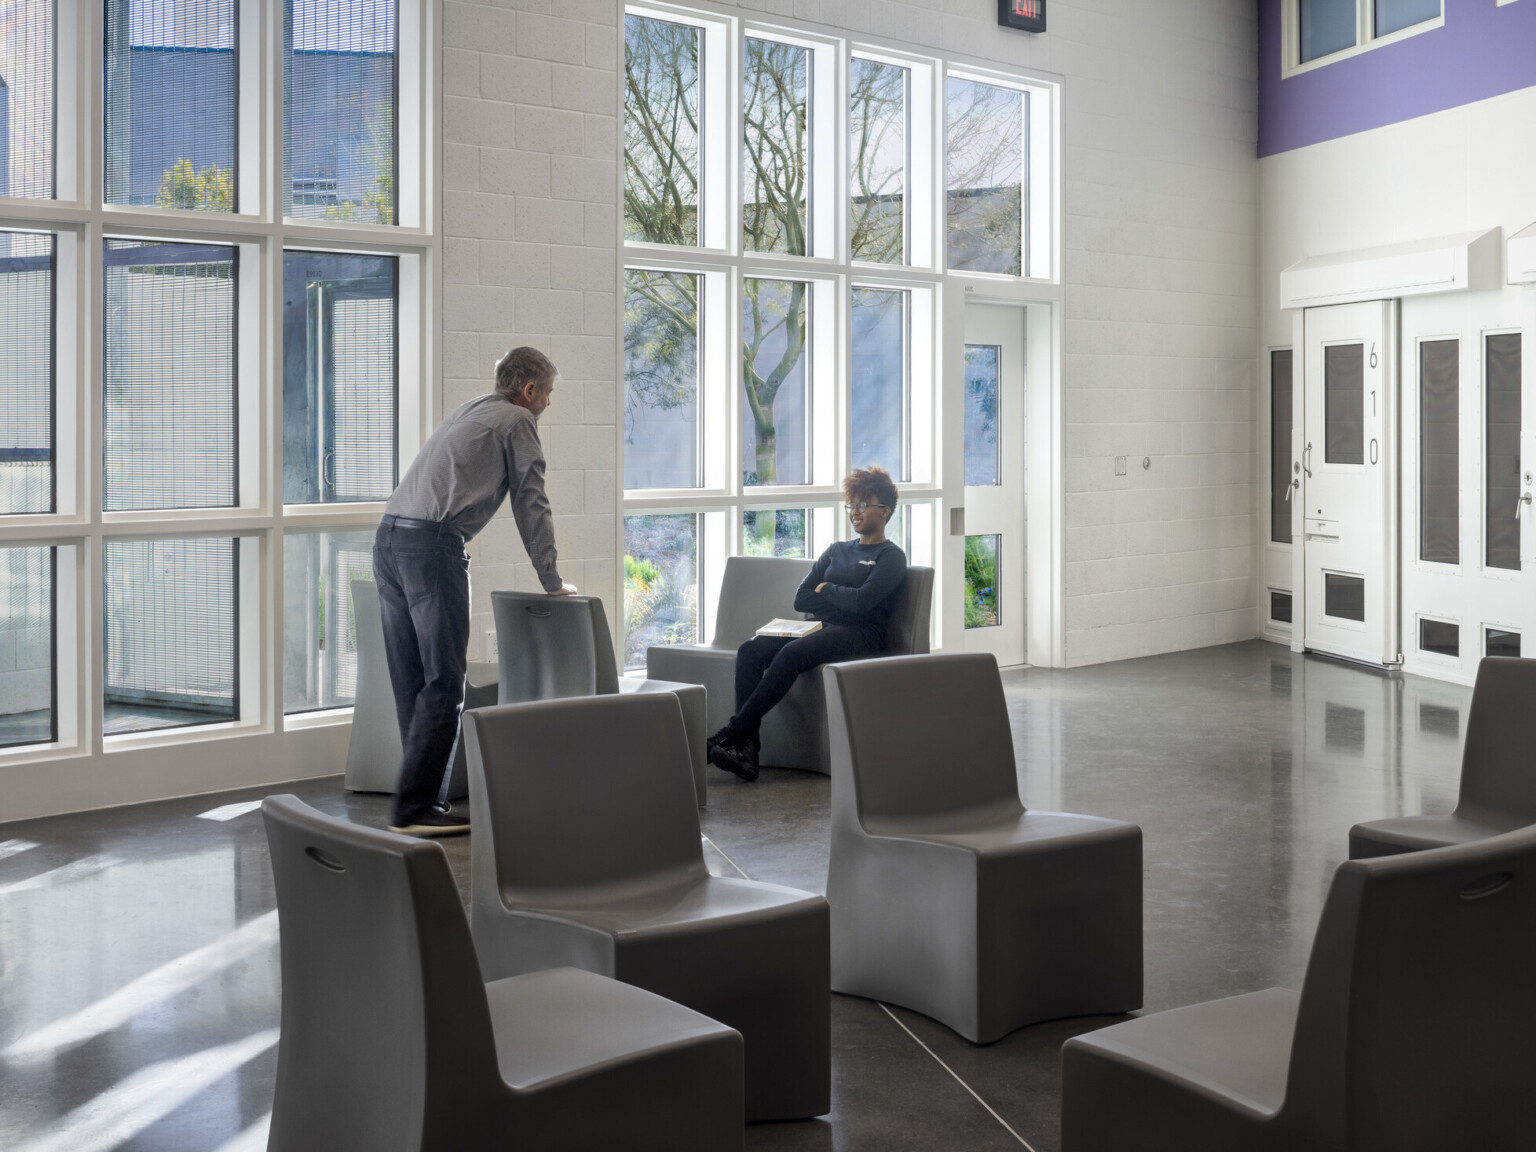 An interior photo of two people talking inside a communal area of the building, double-height windows, purple accent wall